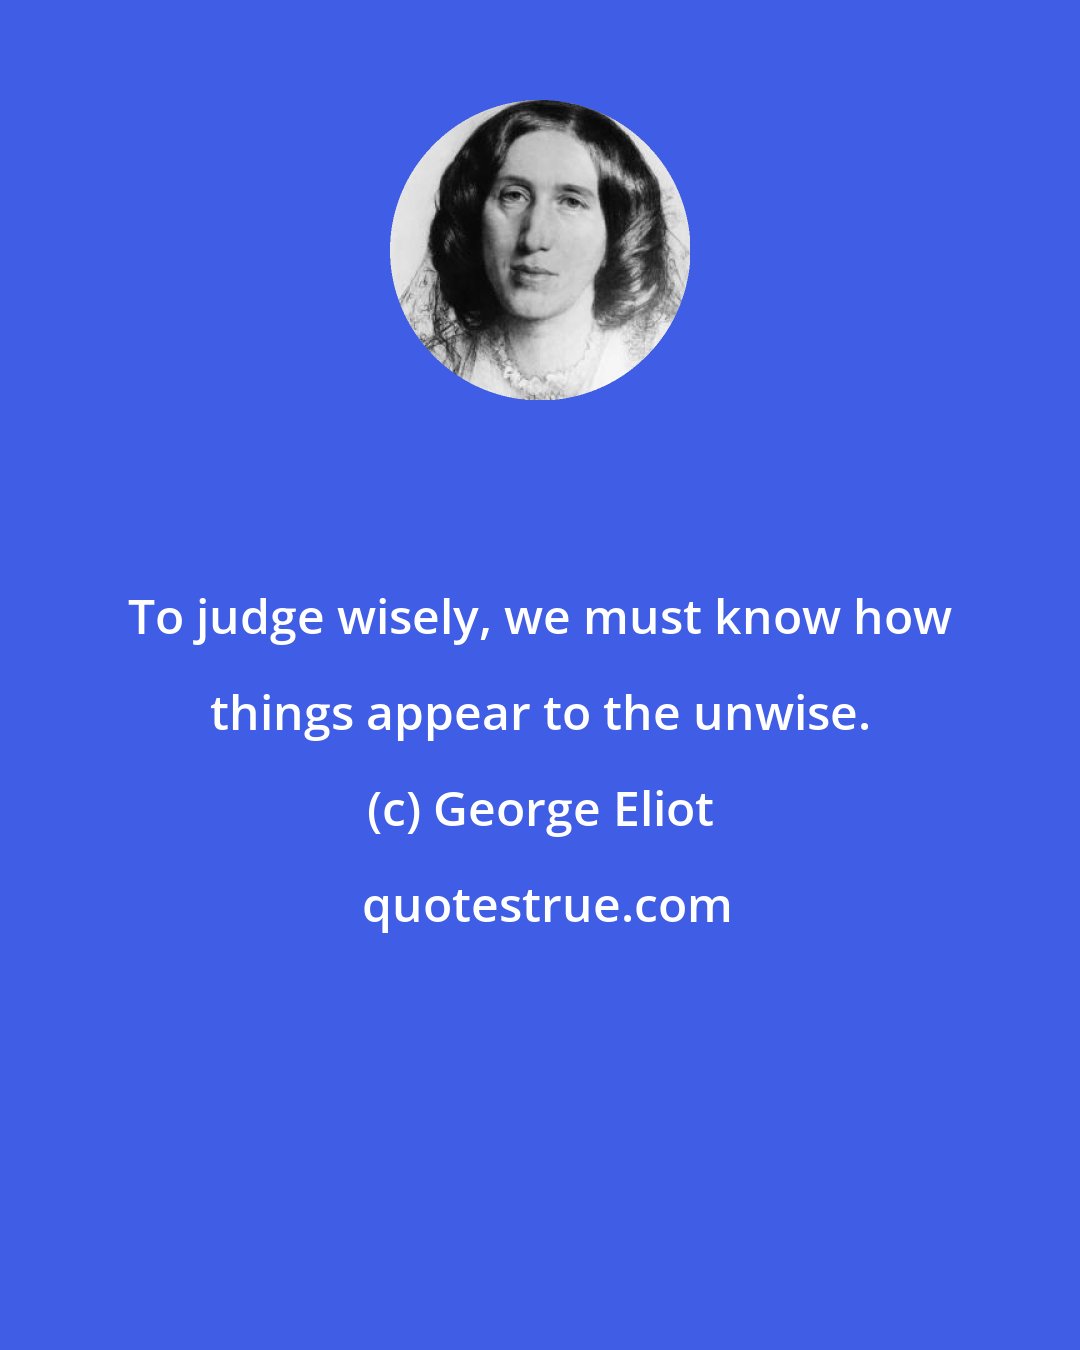 George Eliot: To judge wisely, we must know how things appear to the unwise.